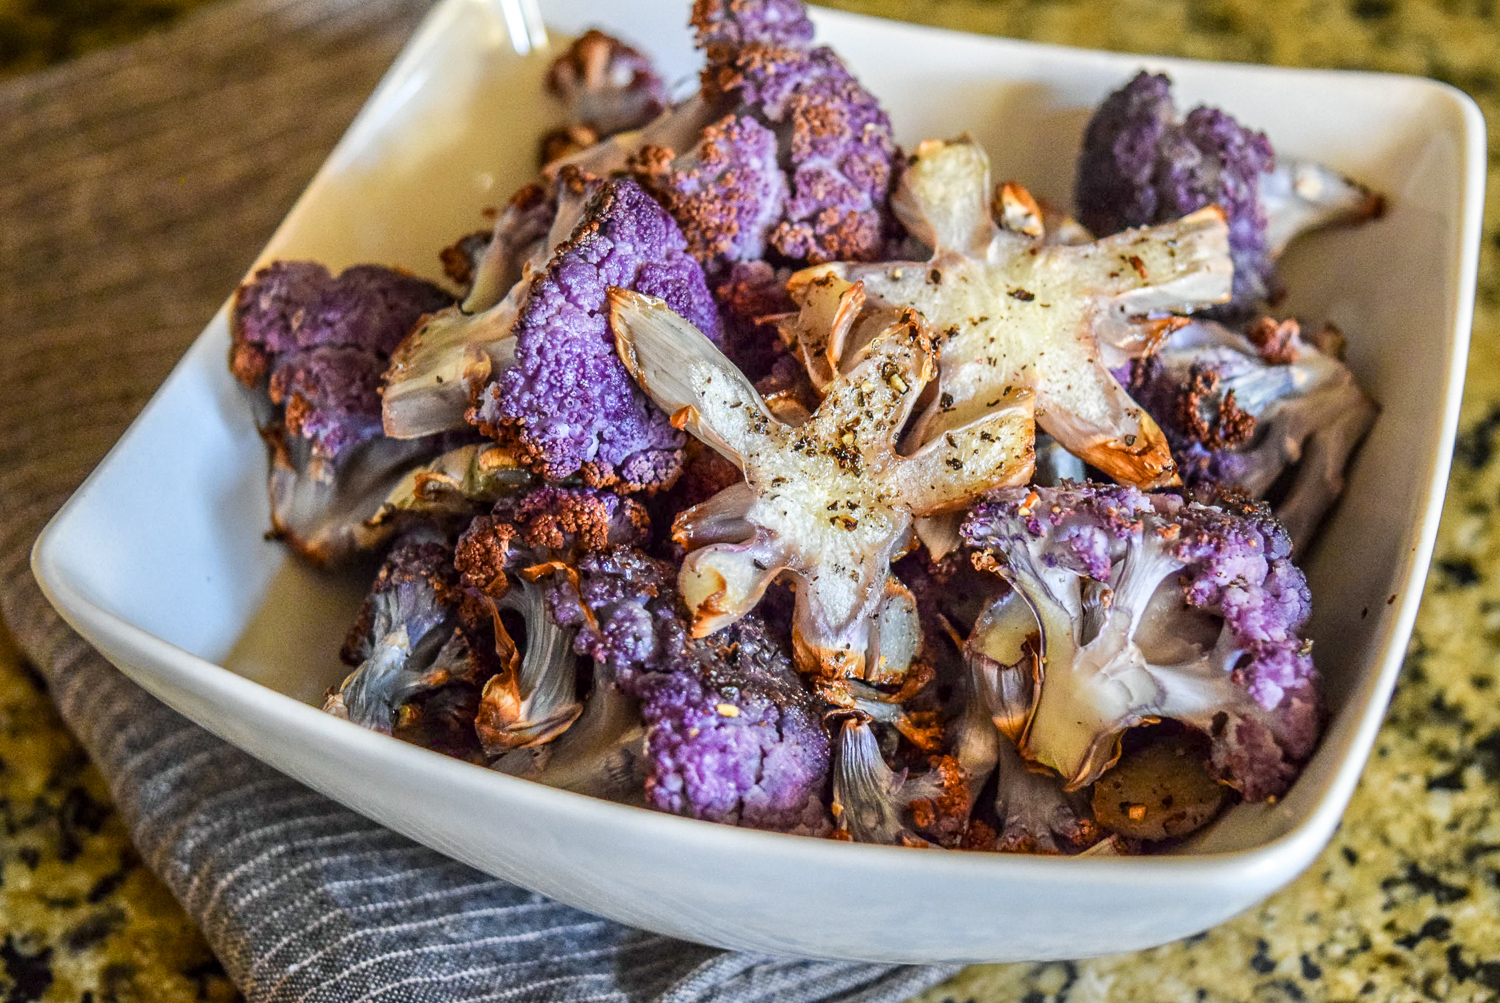 Finished roasted purple cauliflower florets garnished with stem pieces